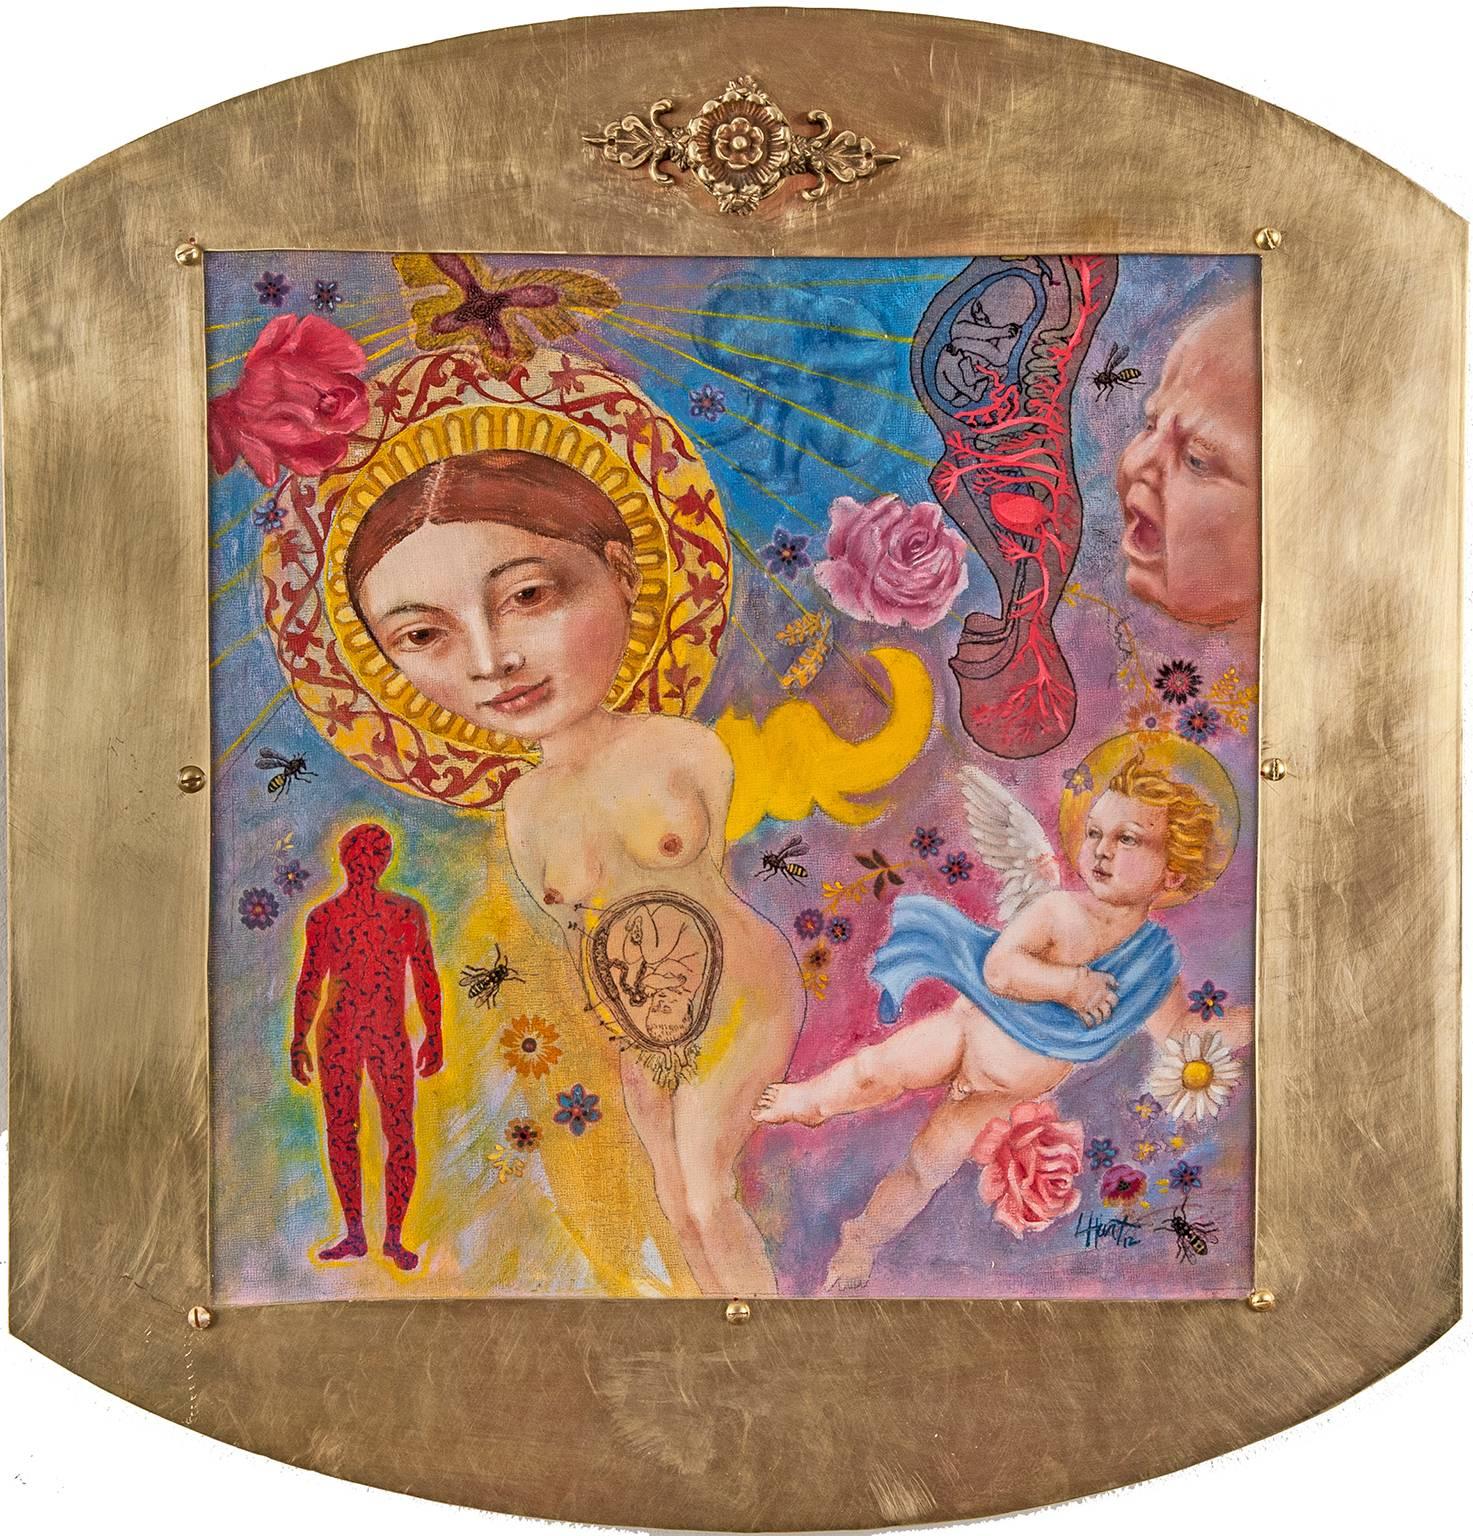 Lannie Hart Figurative Painting - "Womb", with floating female nude and a golden brass surround